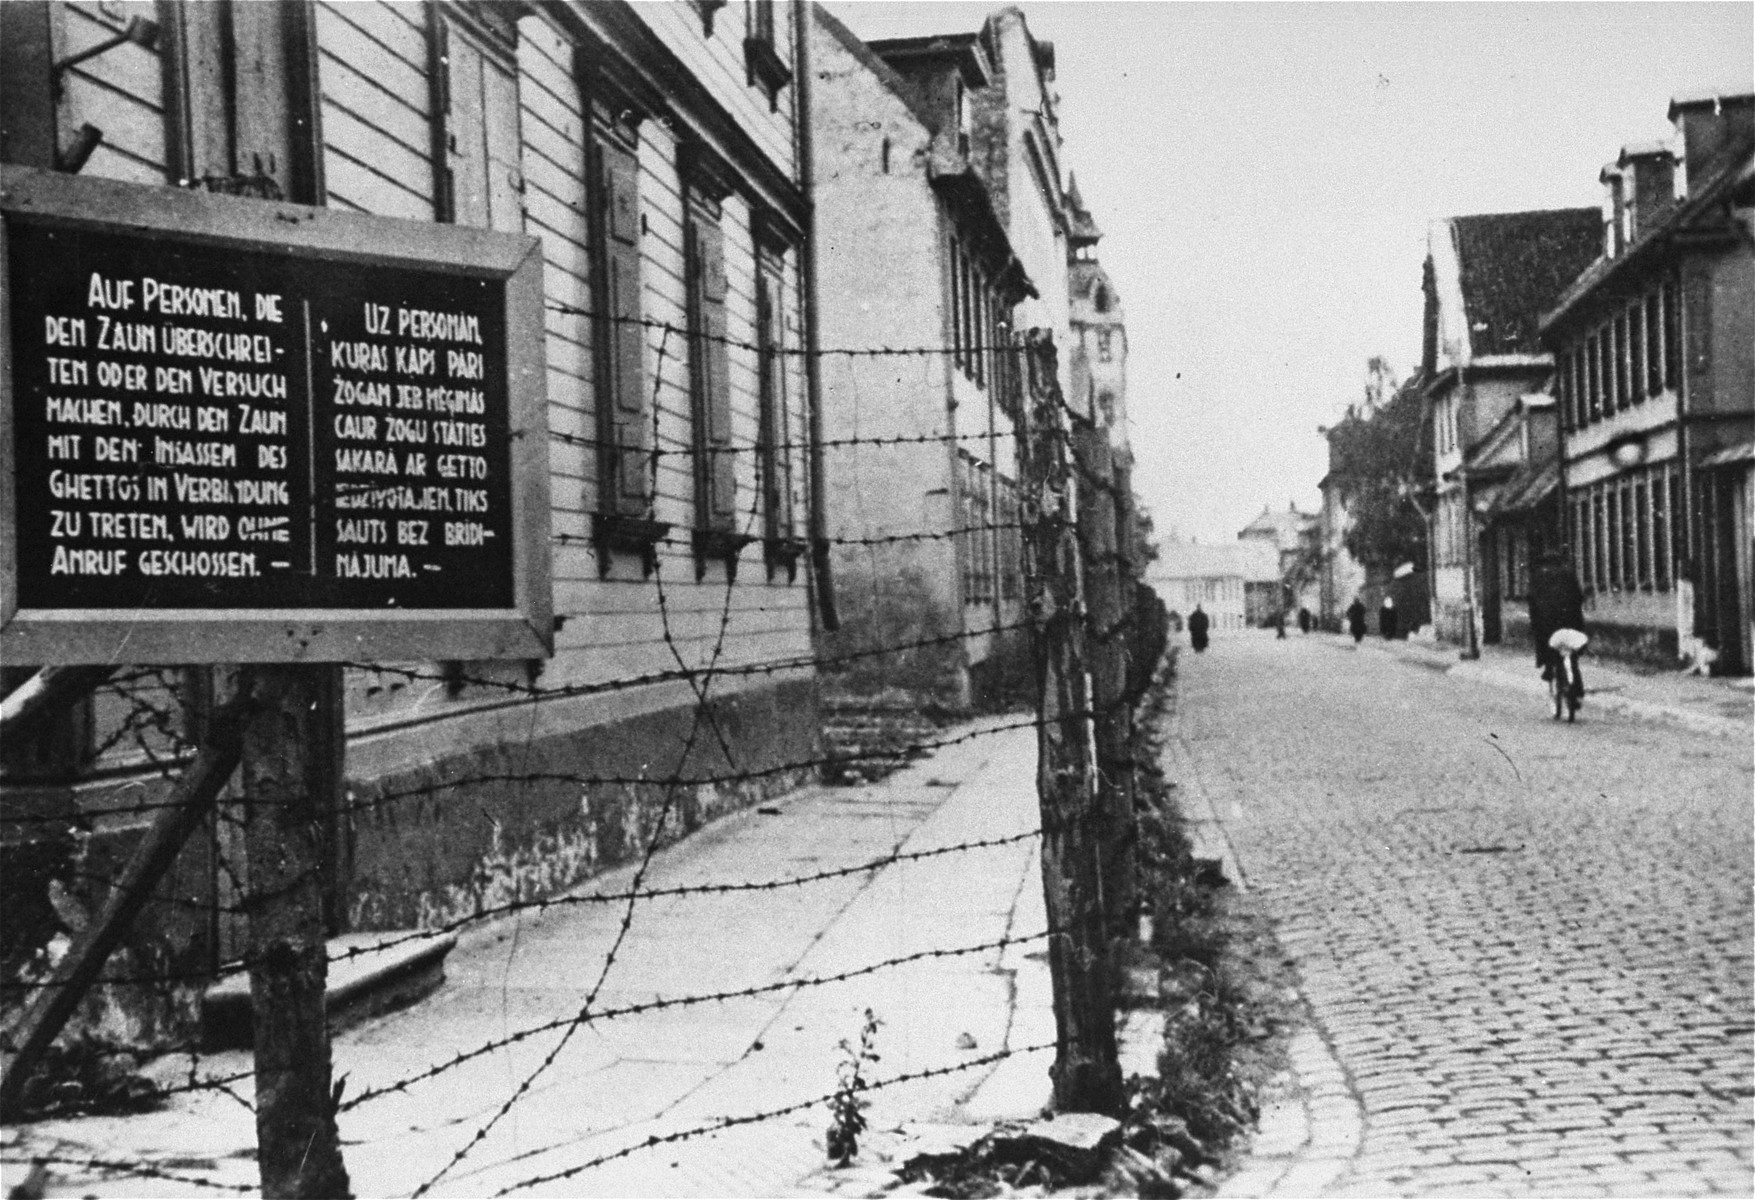 A sign in German and Latvian forbidding unauthorized entrance into the ghetto.